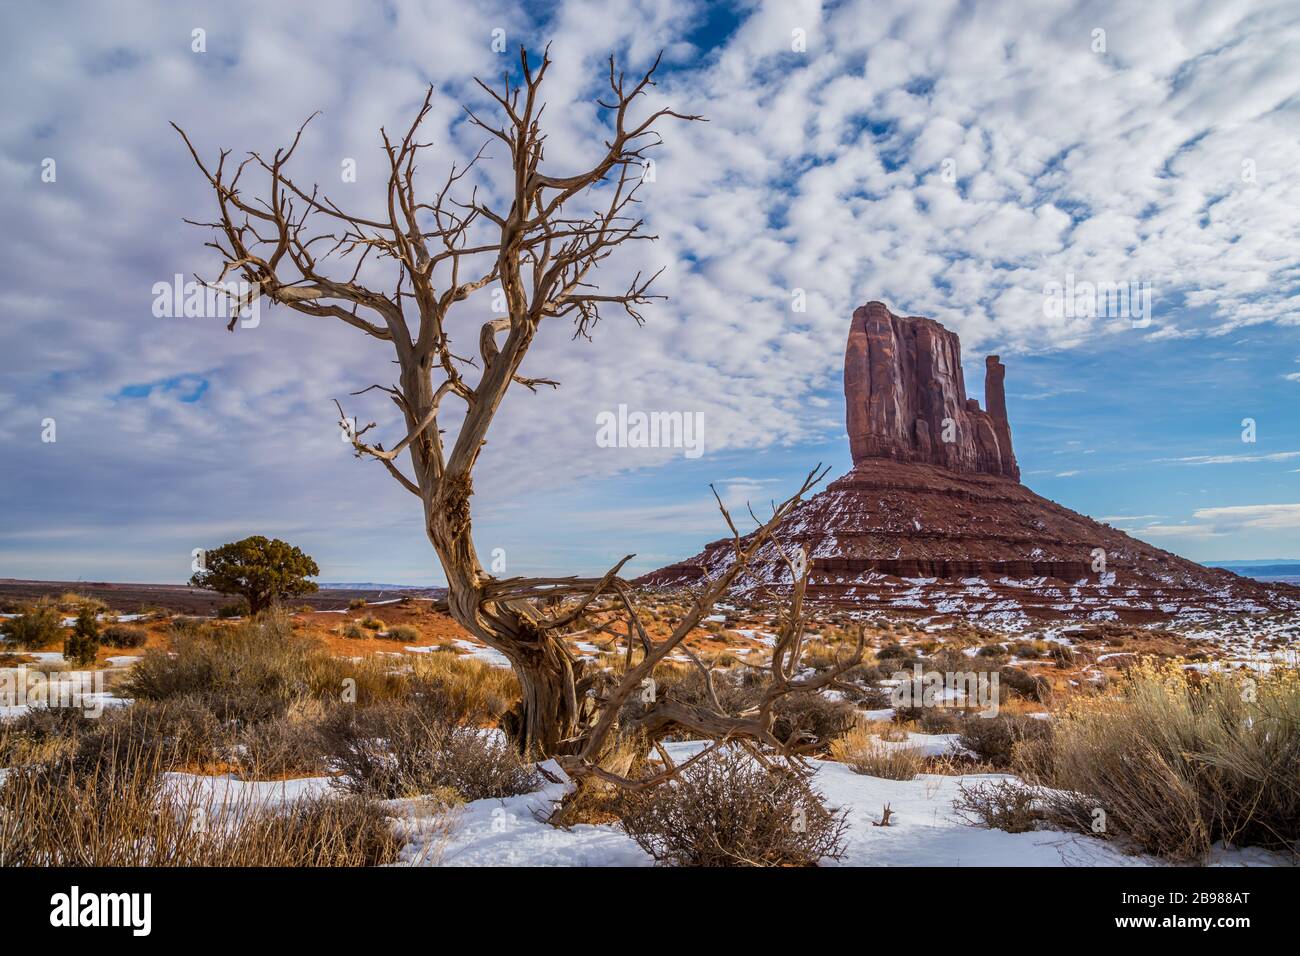 Monument Valley Navajo Tribal Park, West Mitten Butte in the snow Stock Photo